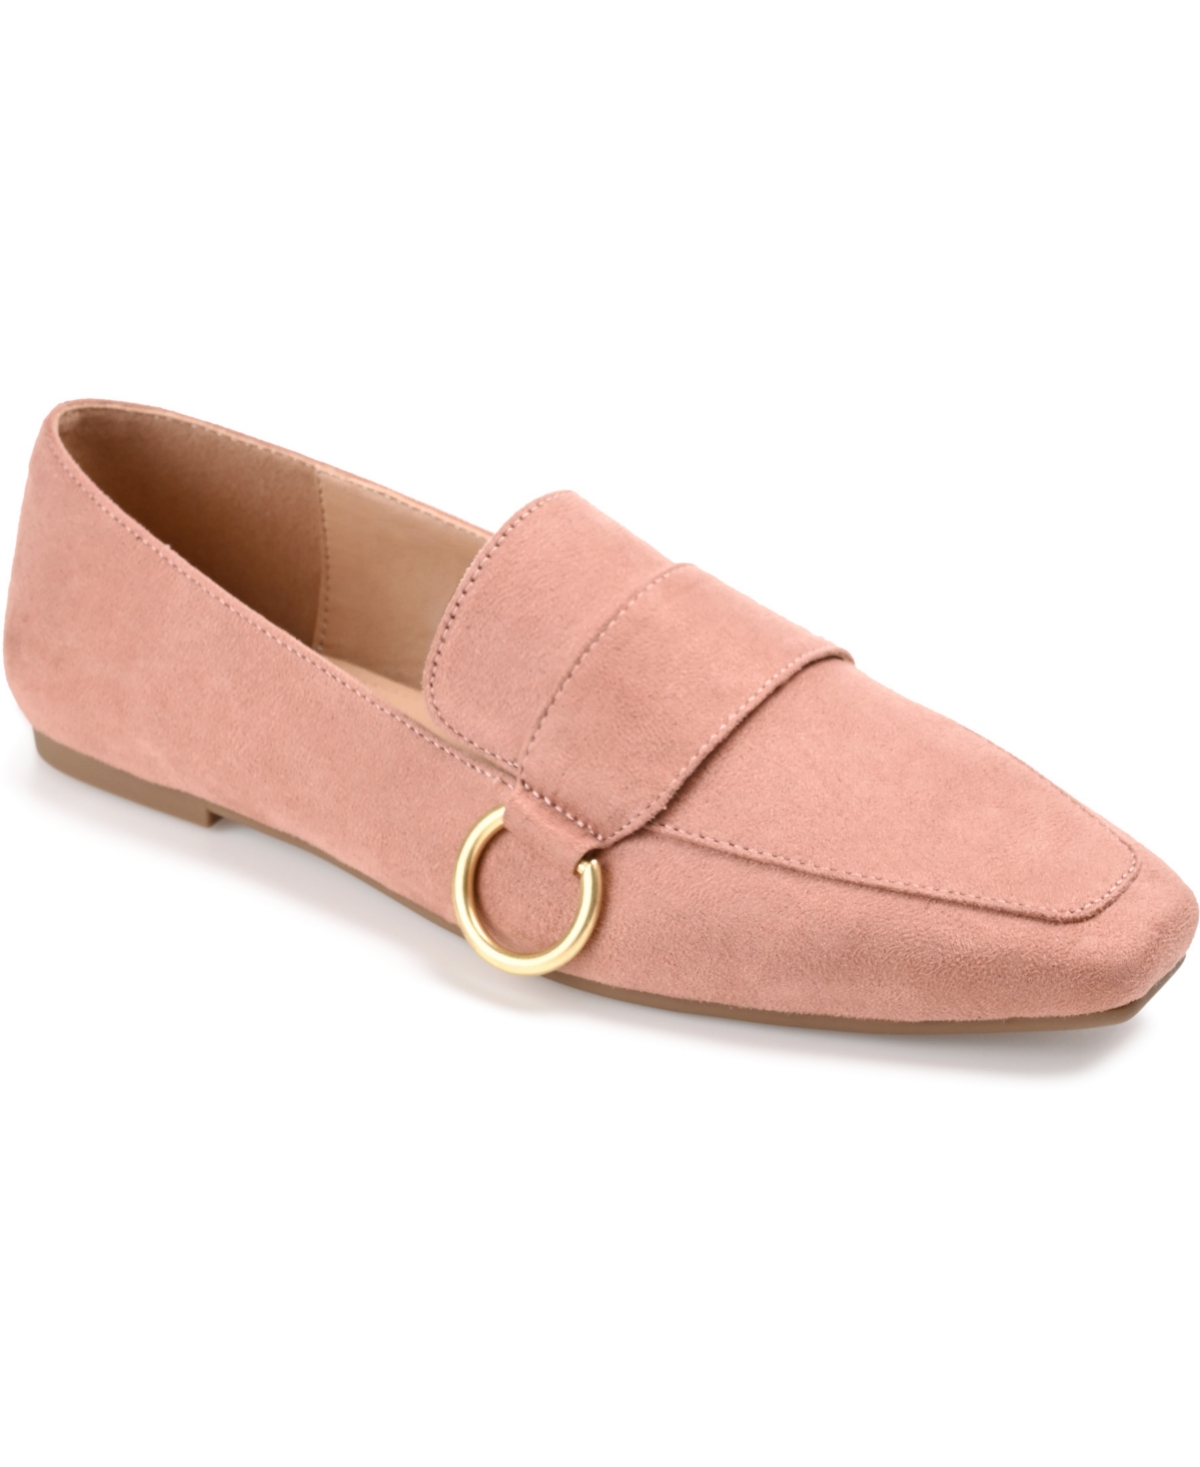 Women's Benntly Square Toe Slip On Loafers - Taupe